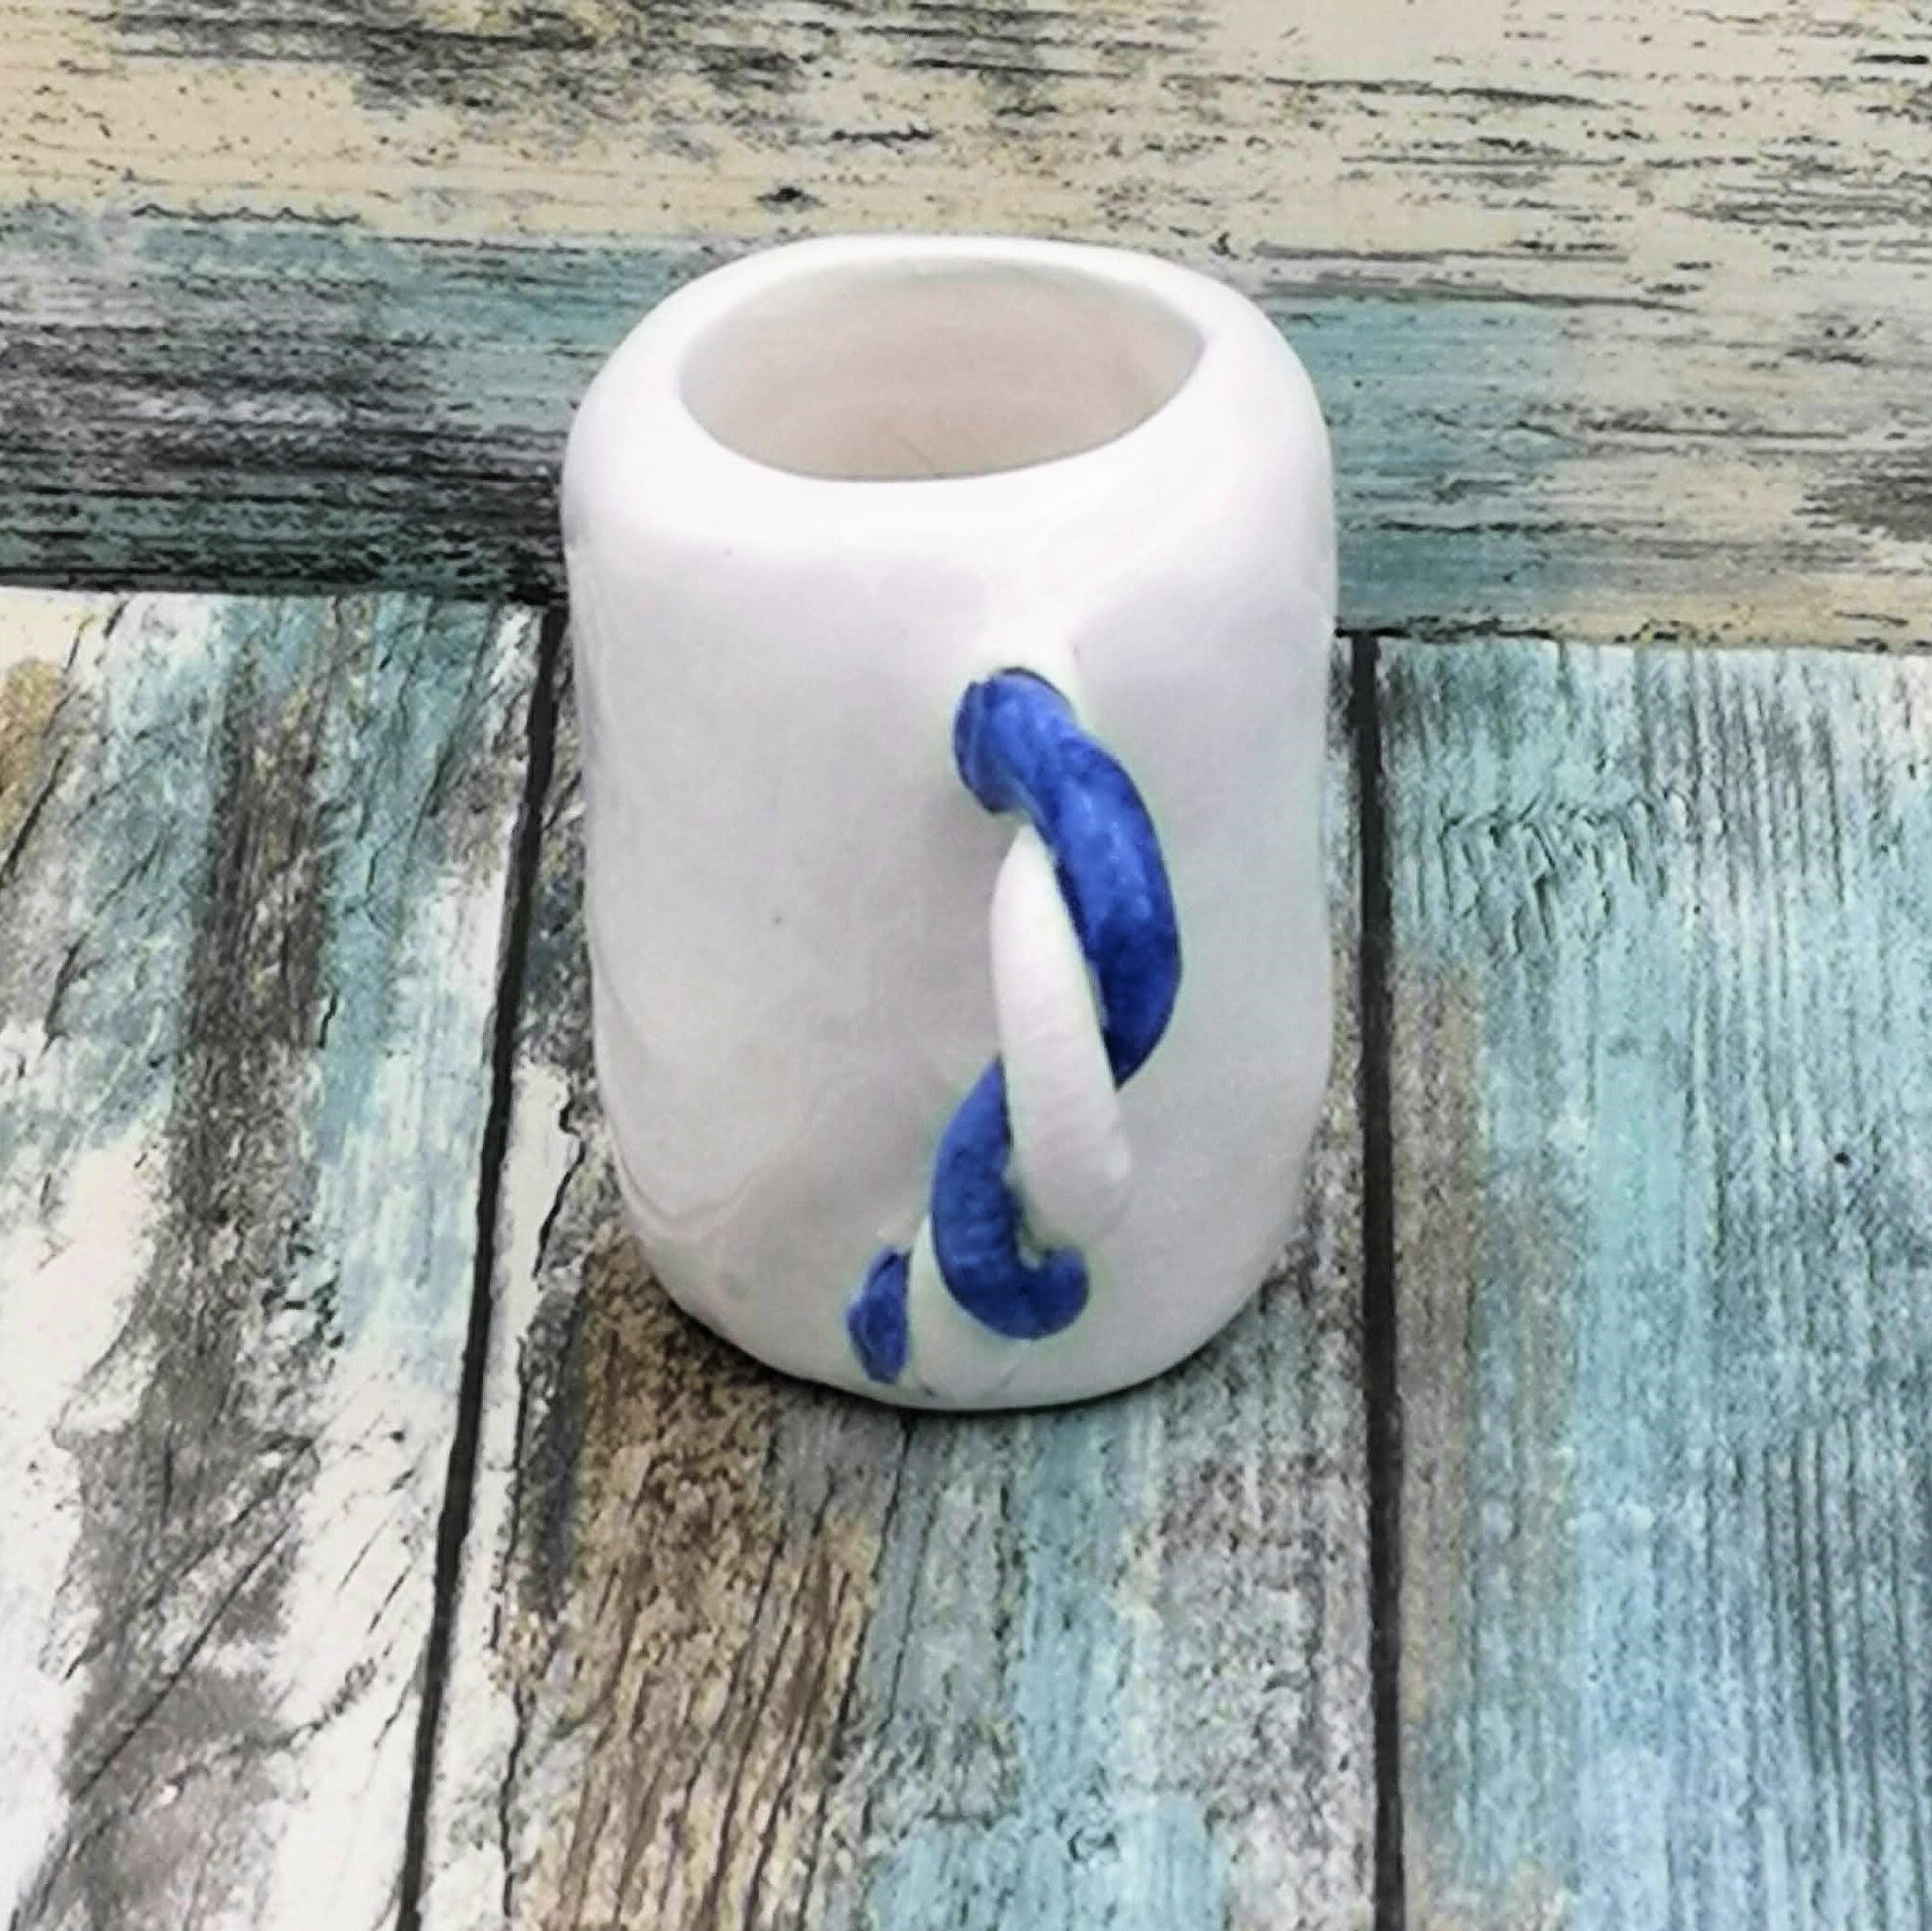 Handmade Ceramic Espresso Cup Hand Painted Blue, Fathers Day Best Gifts For Him, Coffee Lover Gift, Dad Birthday Gift - Ceramica Ana Rafael